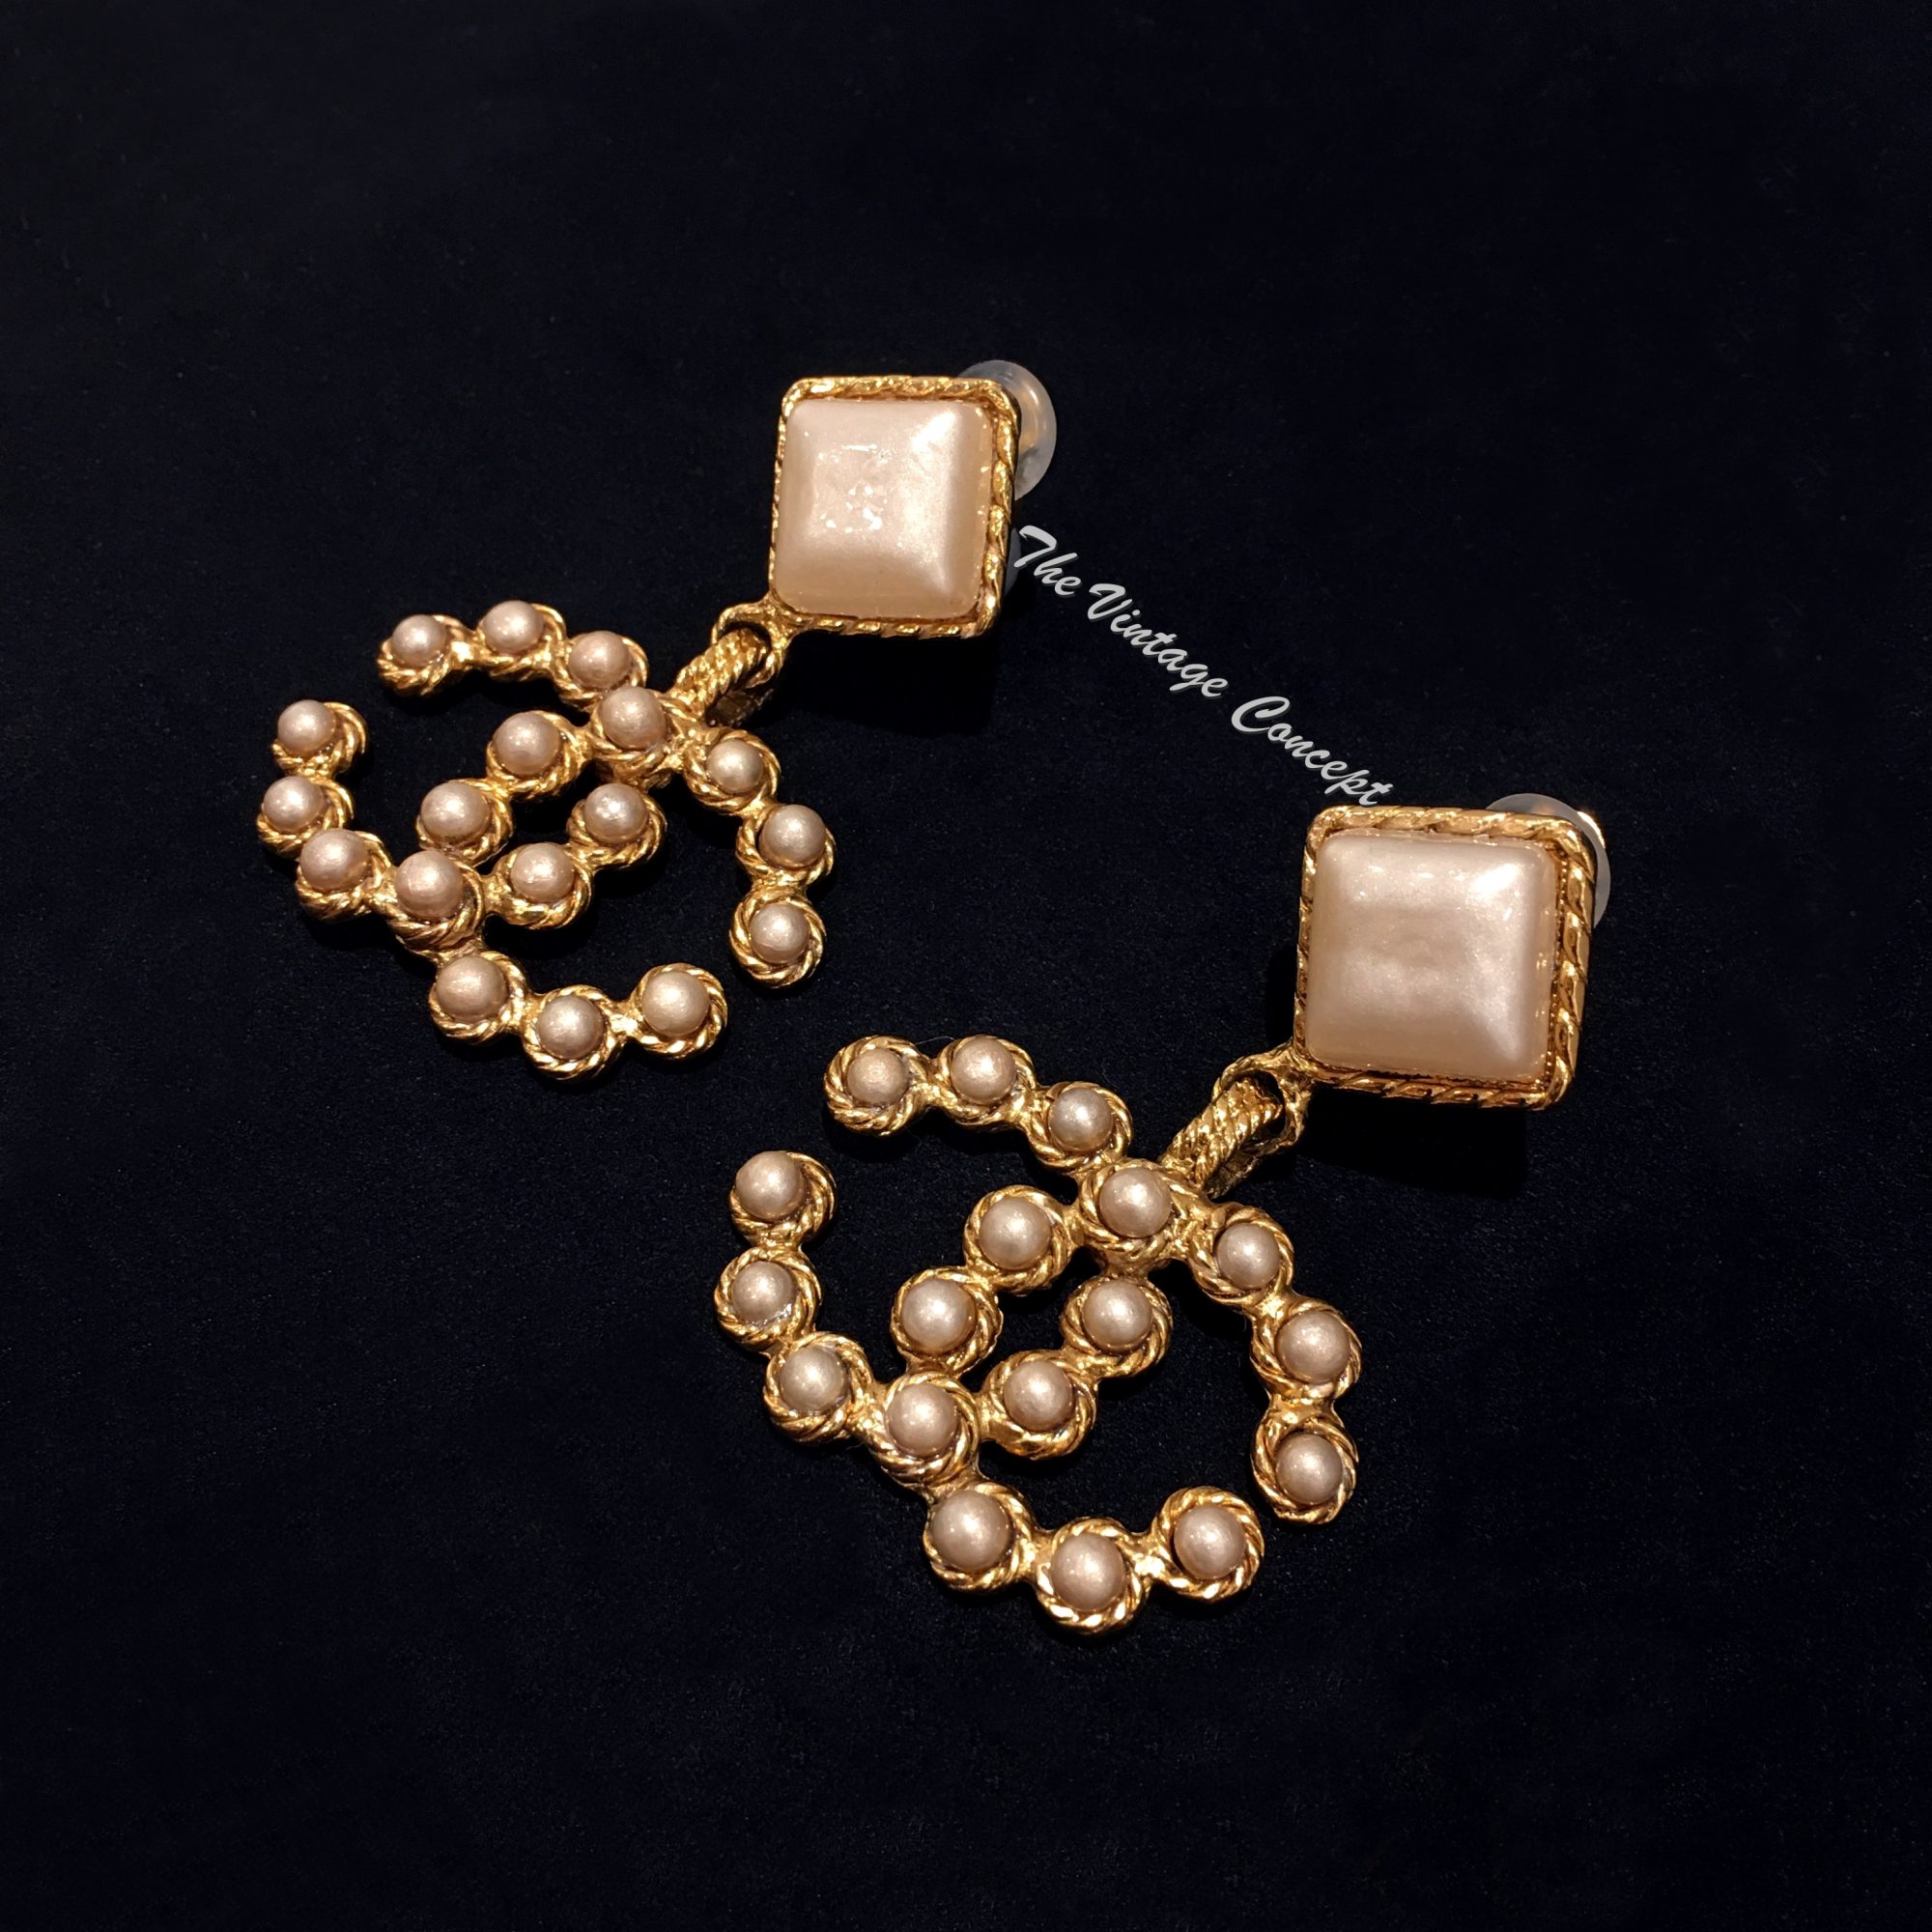 Chanel Gold Tone Large Faux Pearl Dangle CC Logo Clip Earrings (SOLD) - The Vintage Concept